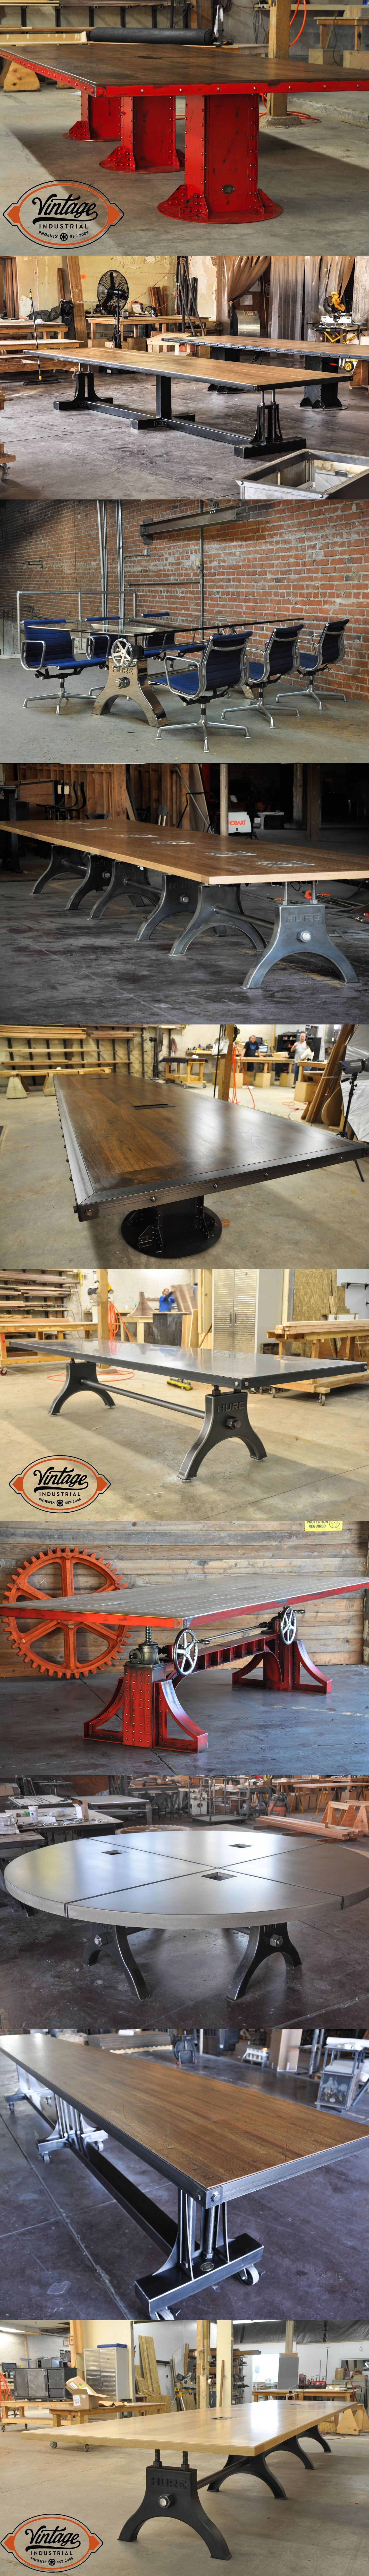 Vintage Industrial offers several conference table options that are all customizable with size, finish, color, dataport, and top